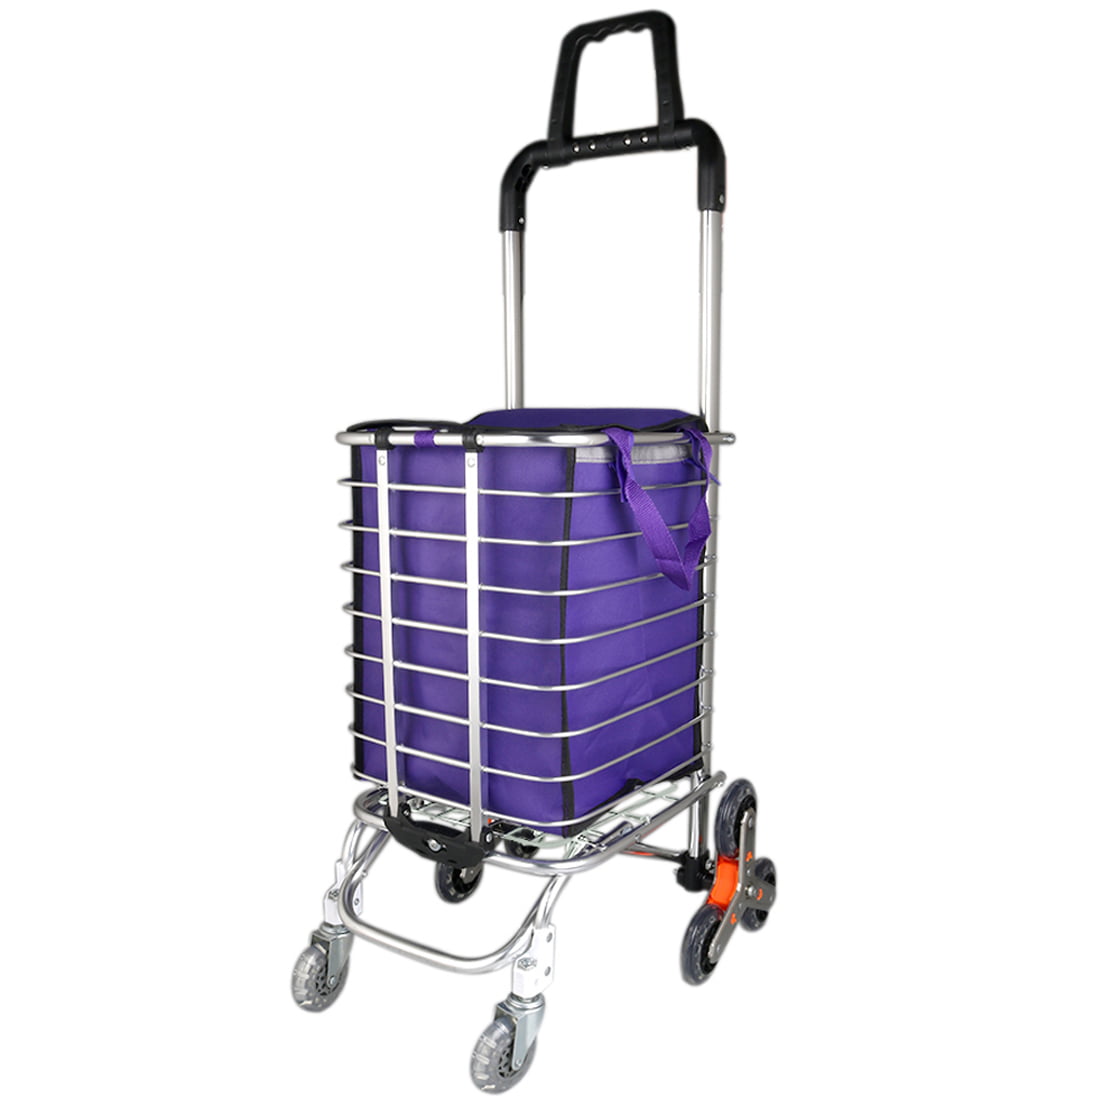 MDBYMX Shopping cart Portable Shopping cart Trolley Stair Climbing cart Collapsible Luggage Trailer Shopping Trolley Bag Color : A